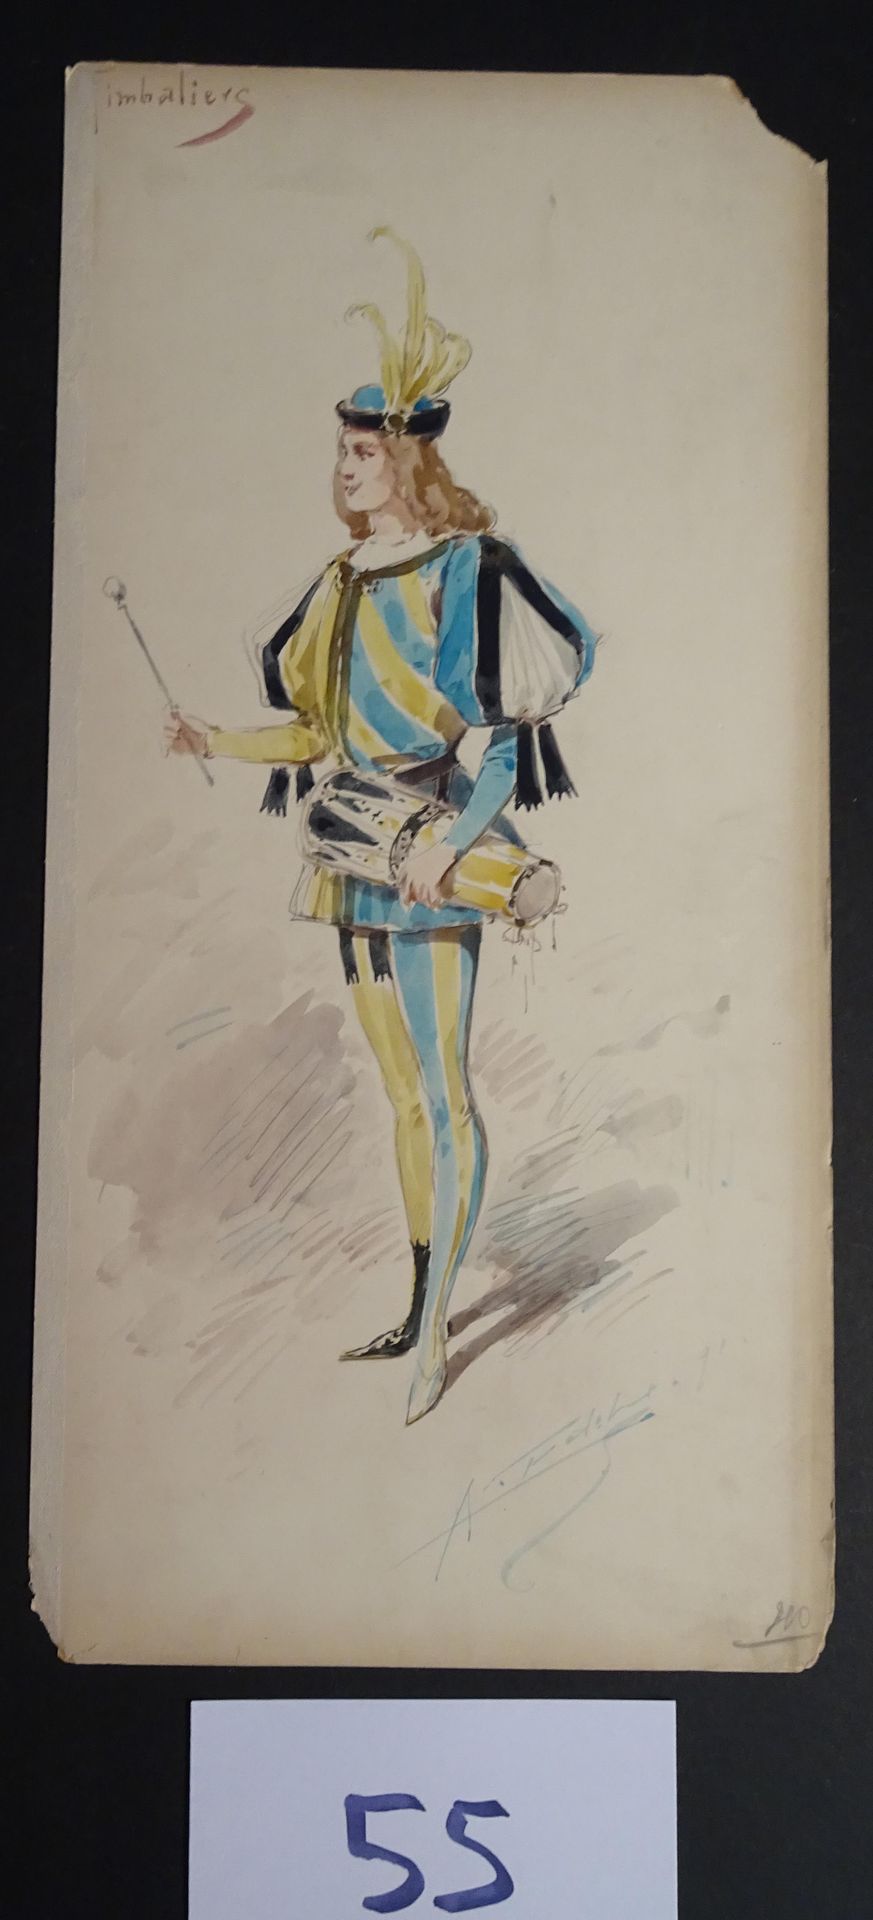 EDEL EDEL ALFREDO ( 1859-1912)

" Timbaliers". Gouache, Aquarell und Tinte, sign&hellip;